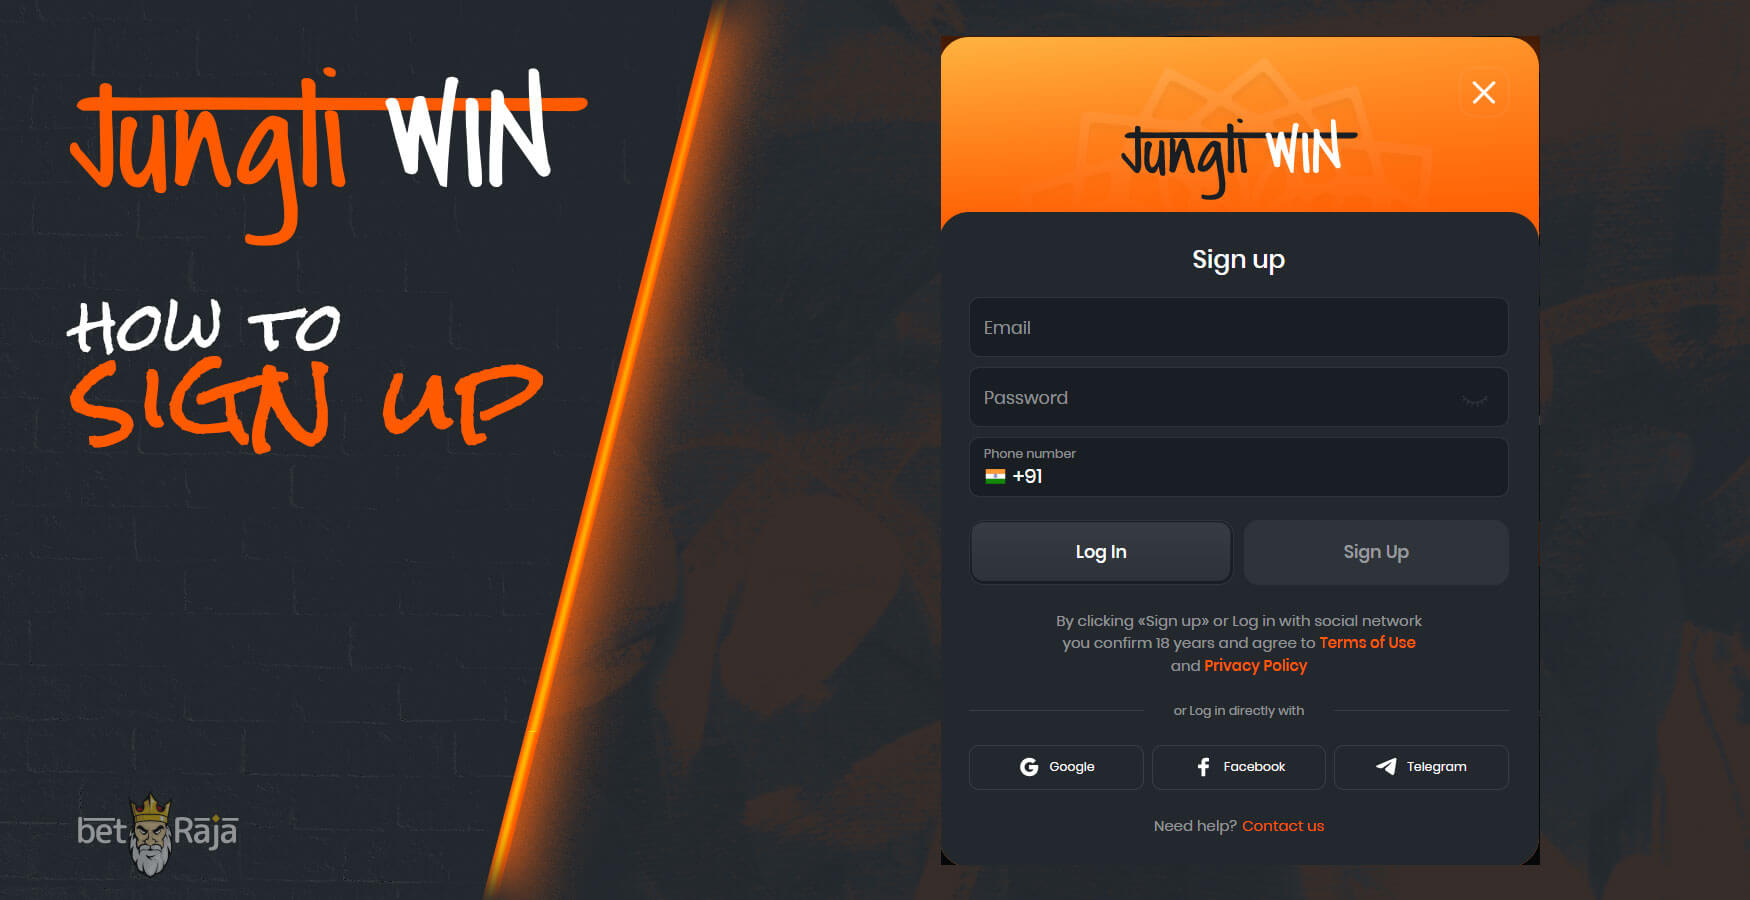 The easiest way to create an account on the jungli win.